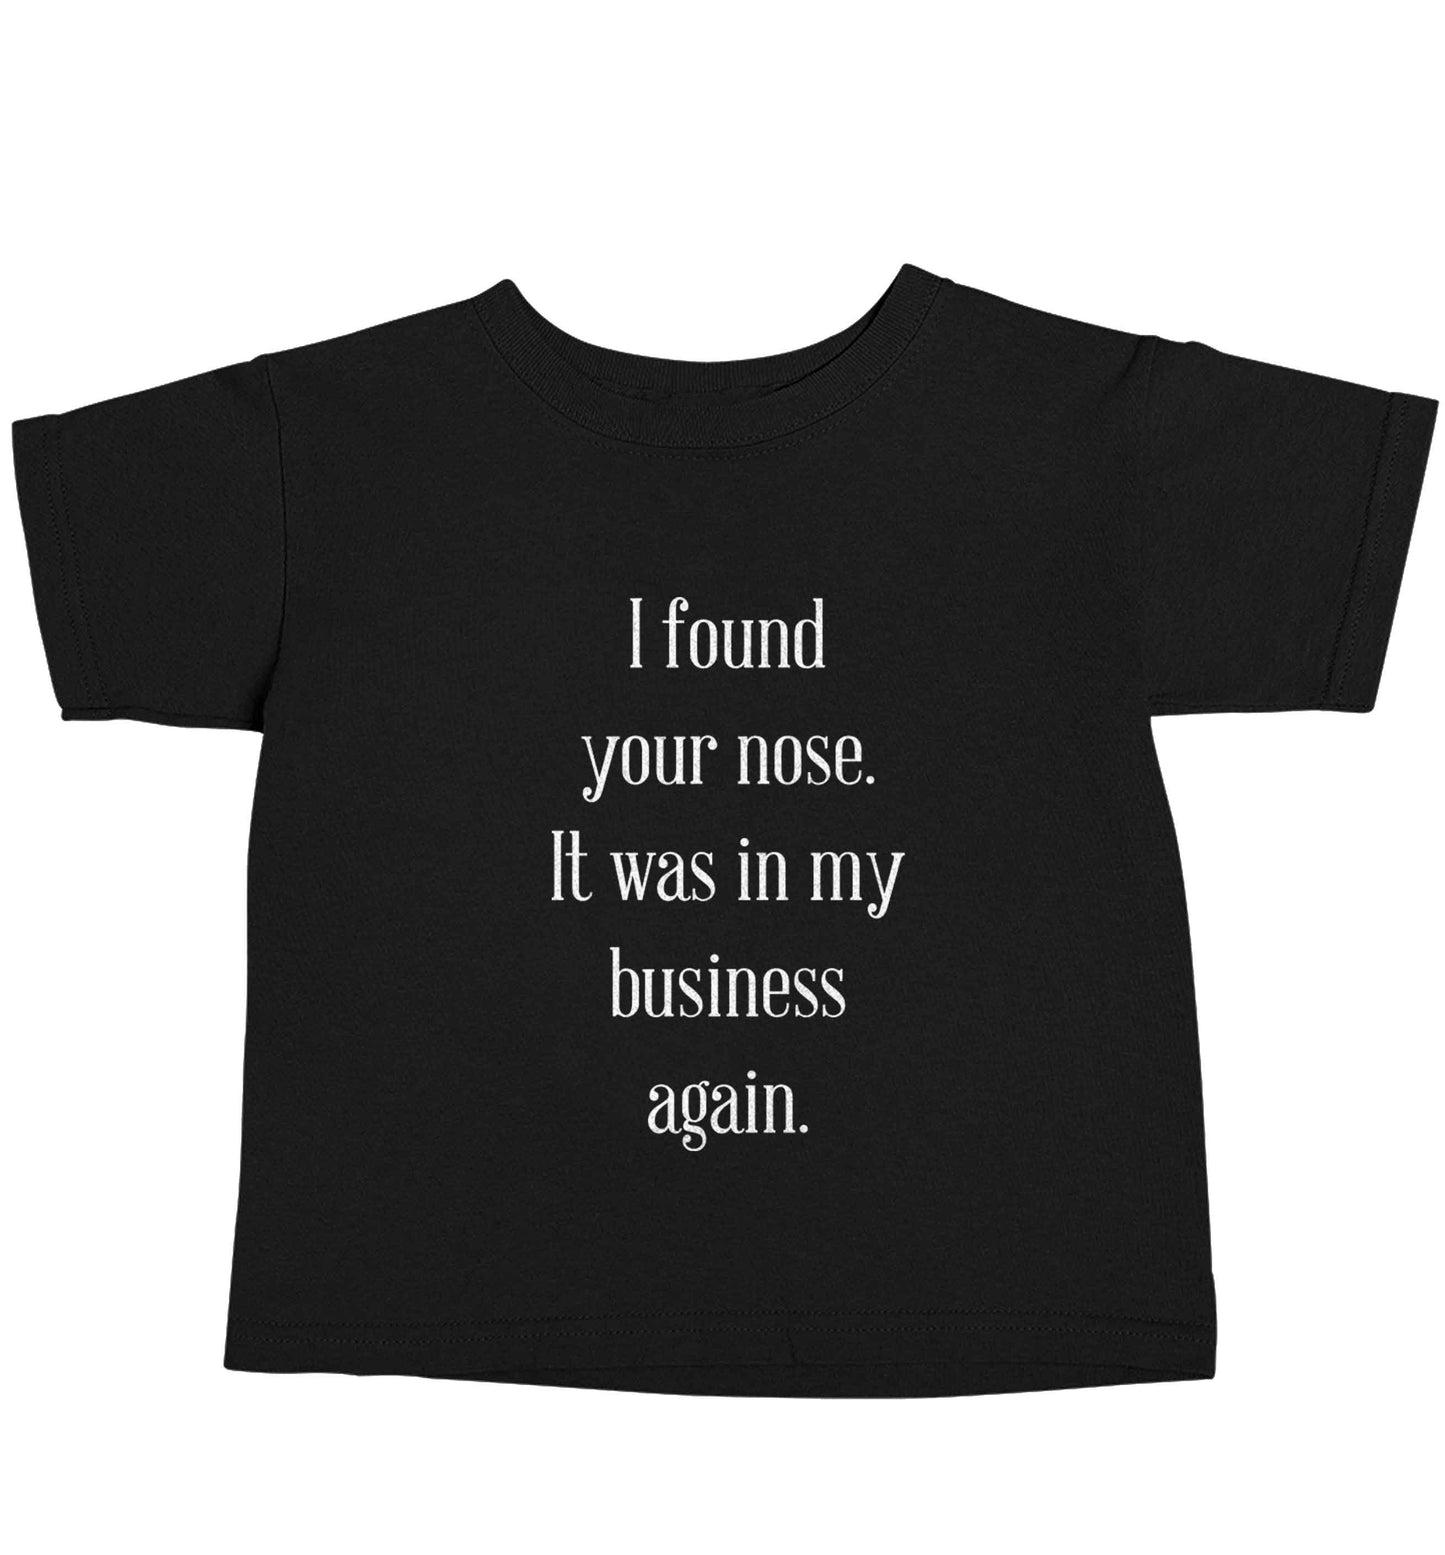 I found your nose it was in my business again Black baby toddler Tshirt 2 years